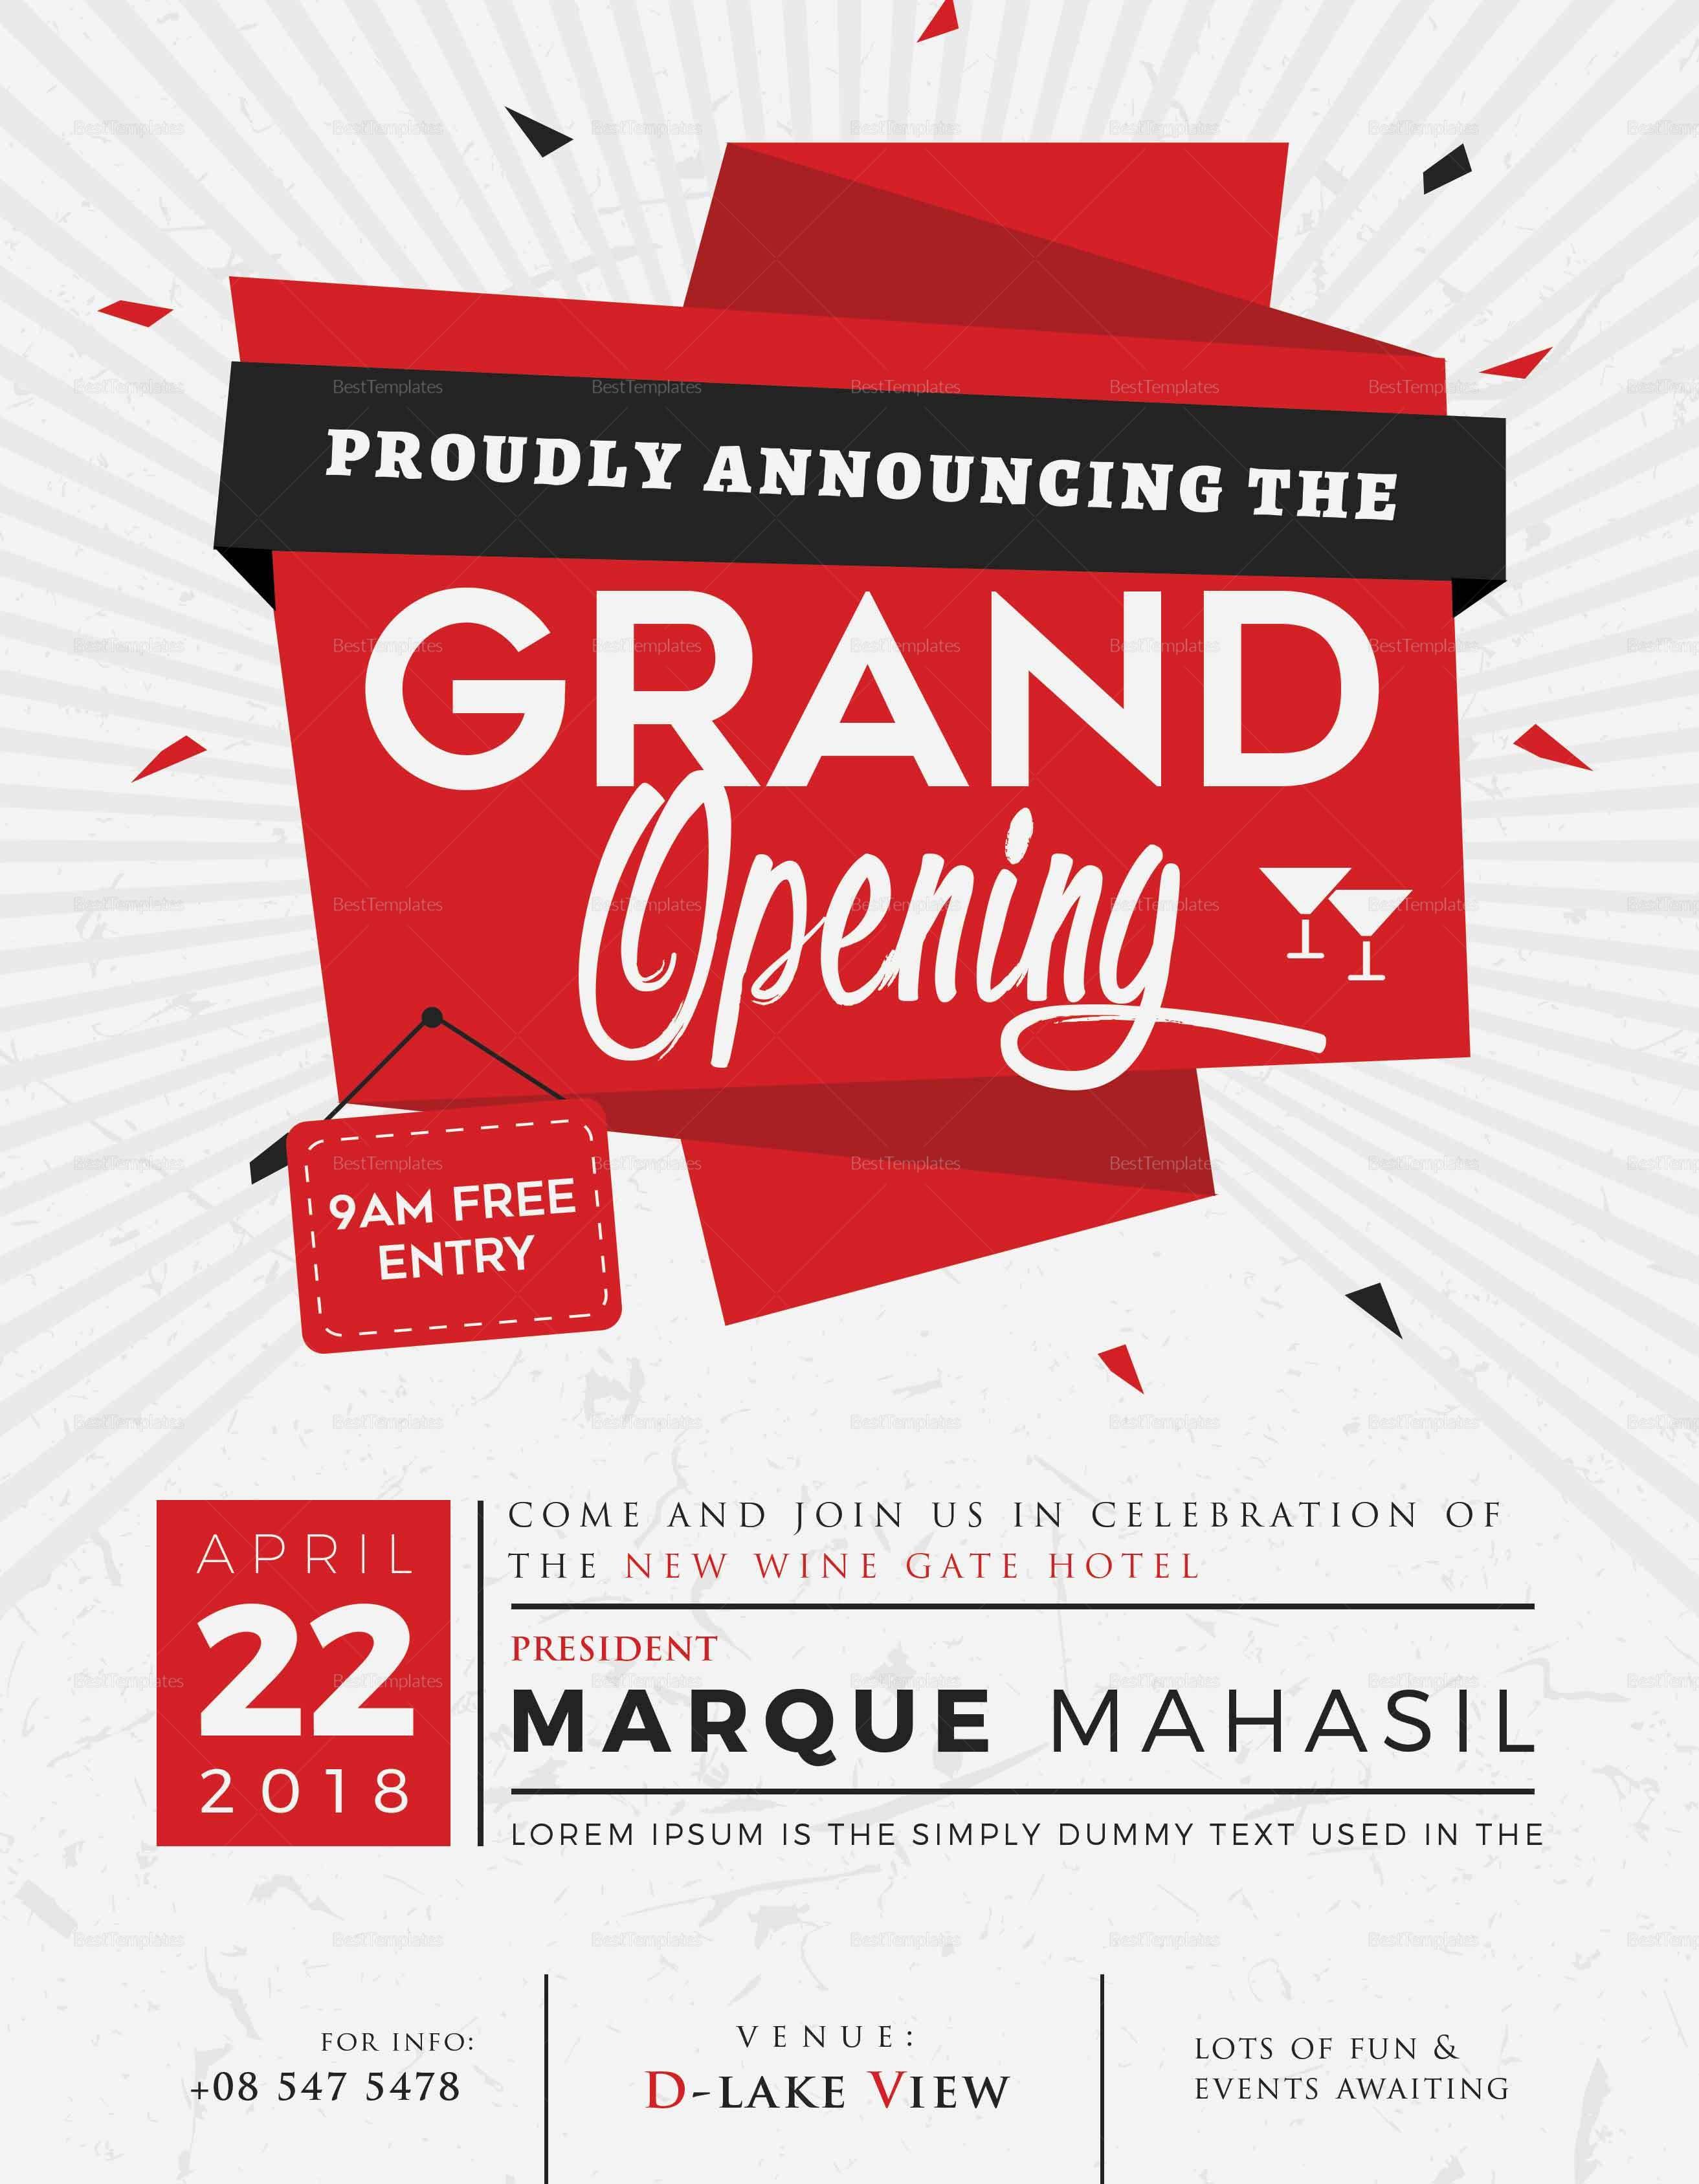 Grand Opening Flyer Design Template in Word PSD